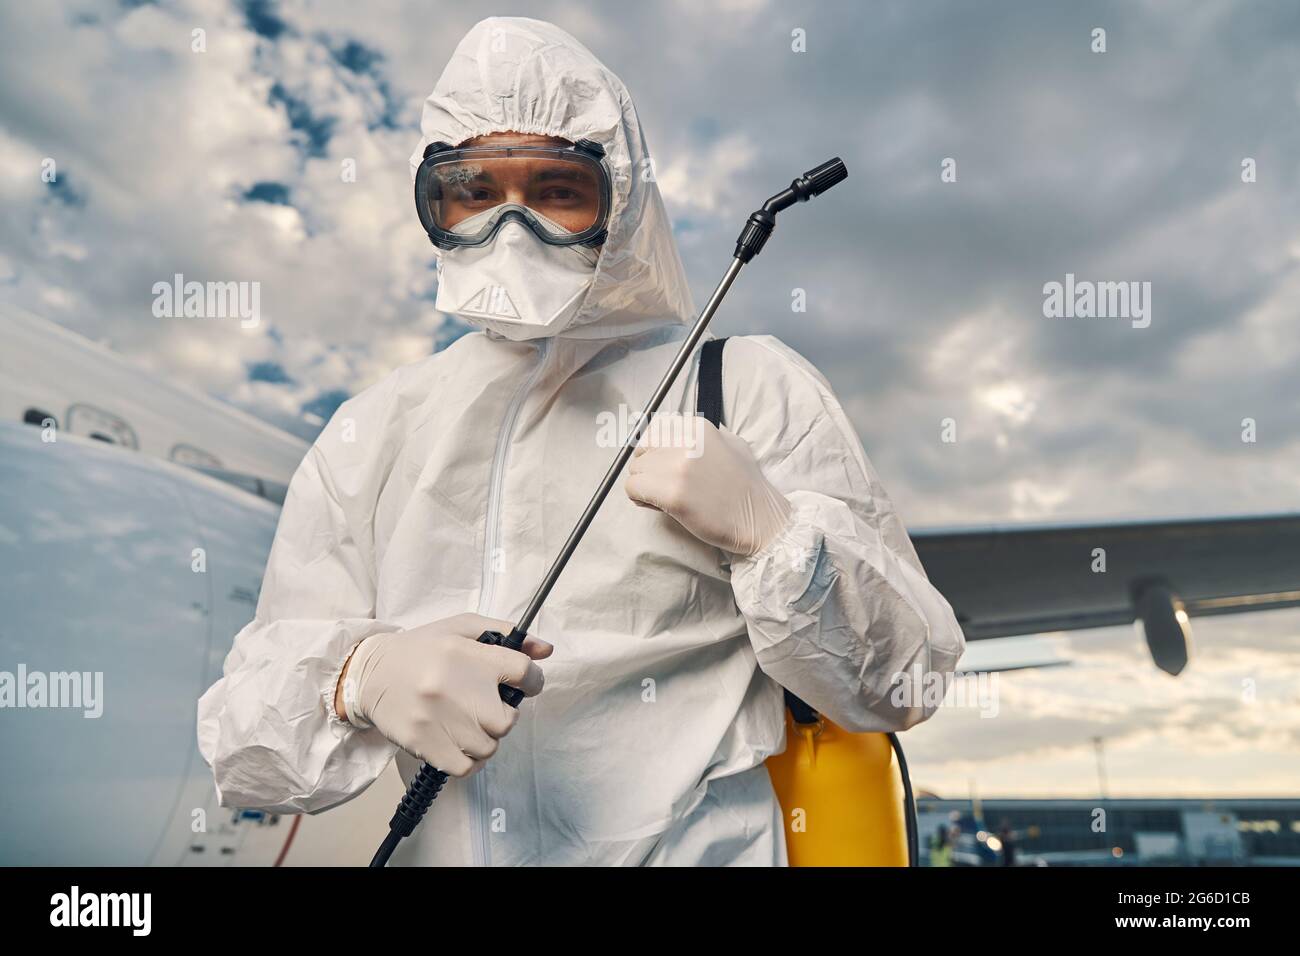 Airport worker dressed in protective gear looking ahead Stock Photo